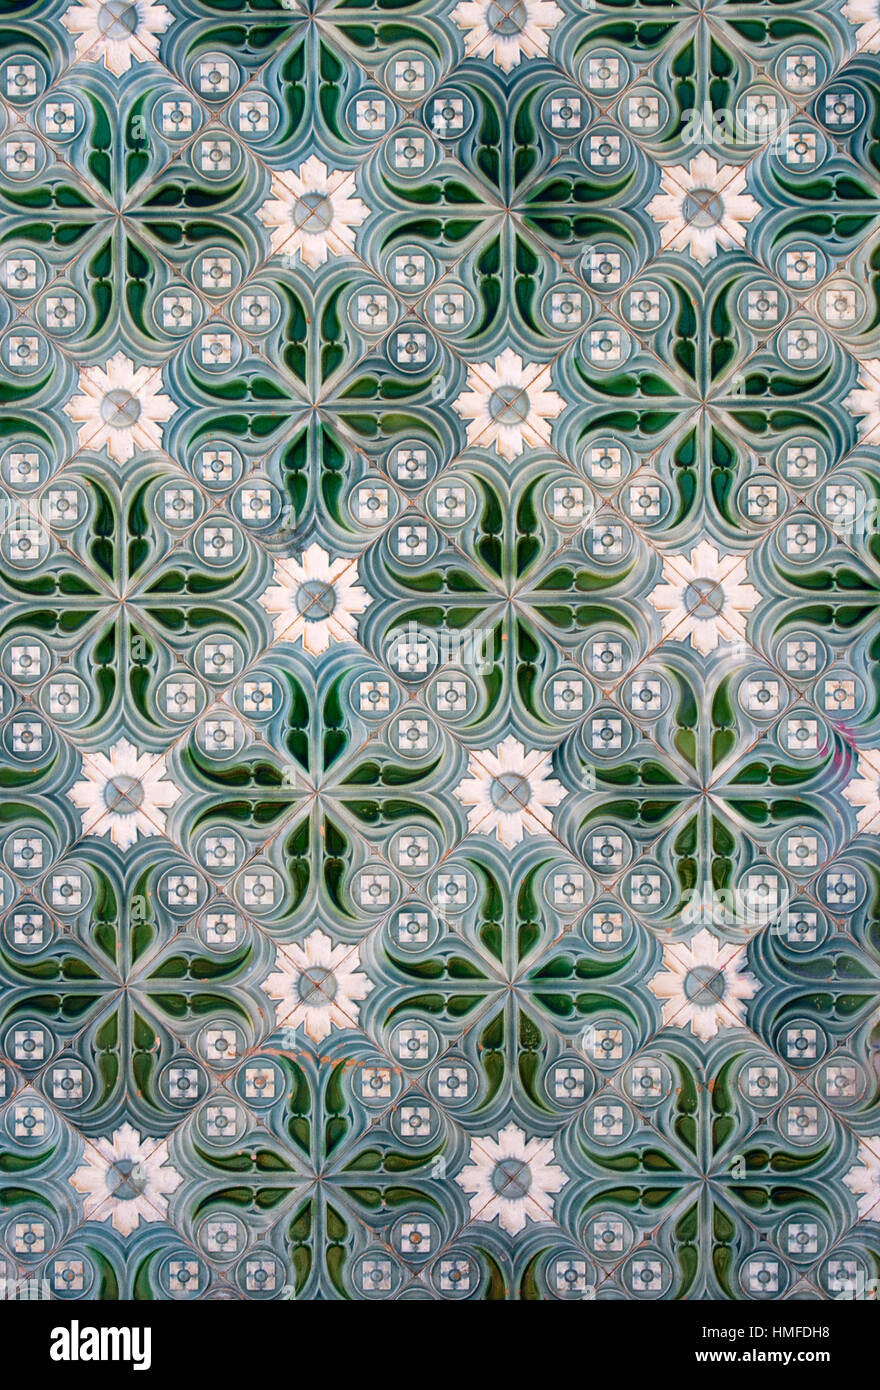 Traditional green and white portuguese tiles Stock Photo